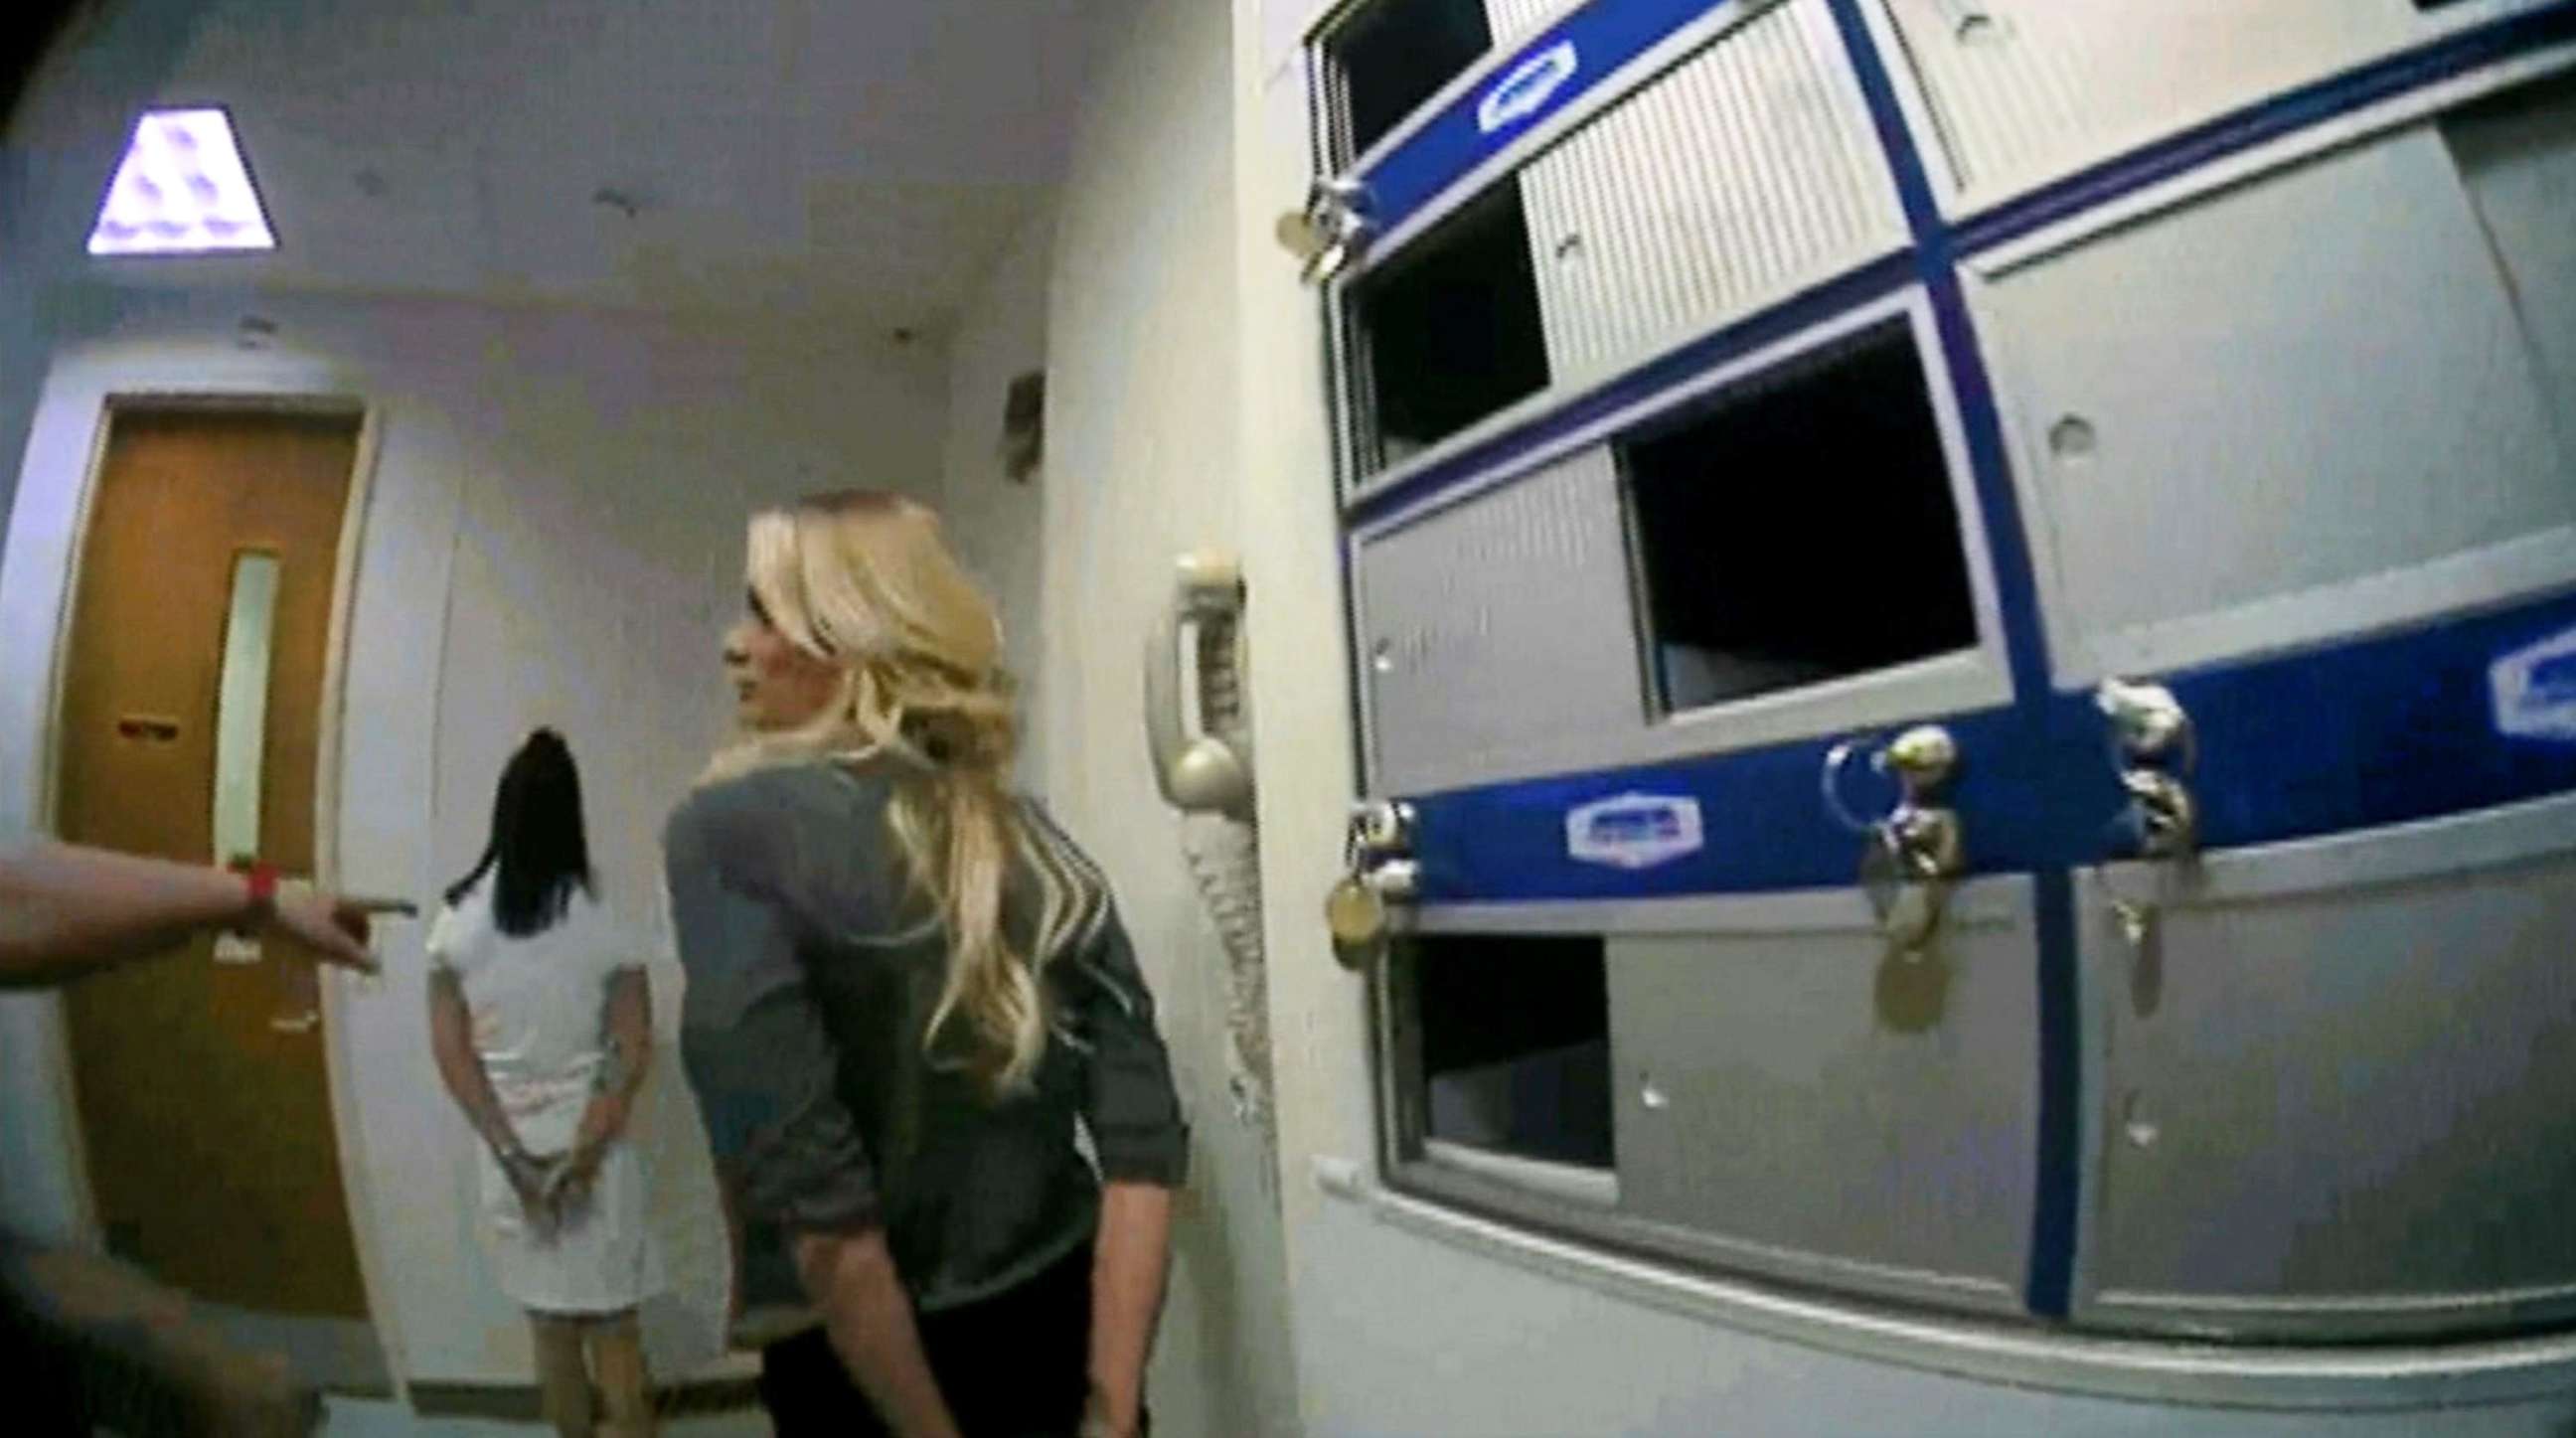 PHOTO: Body cam footage released by the Columbus Police Department shows Stormy Daniels during her arrest after a performance at Sirens Gentlemen's Club in Columbus, Ohio, July 12, 2018.